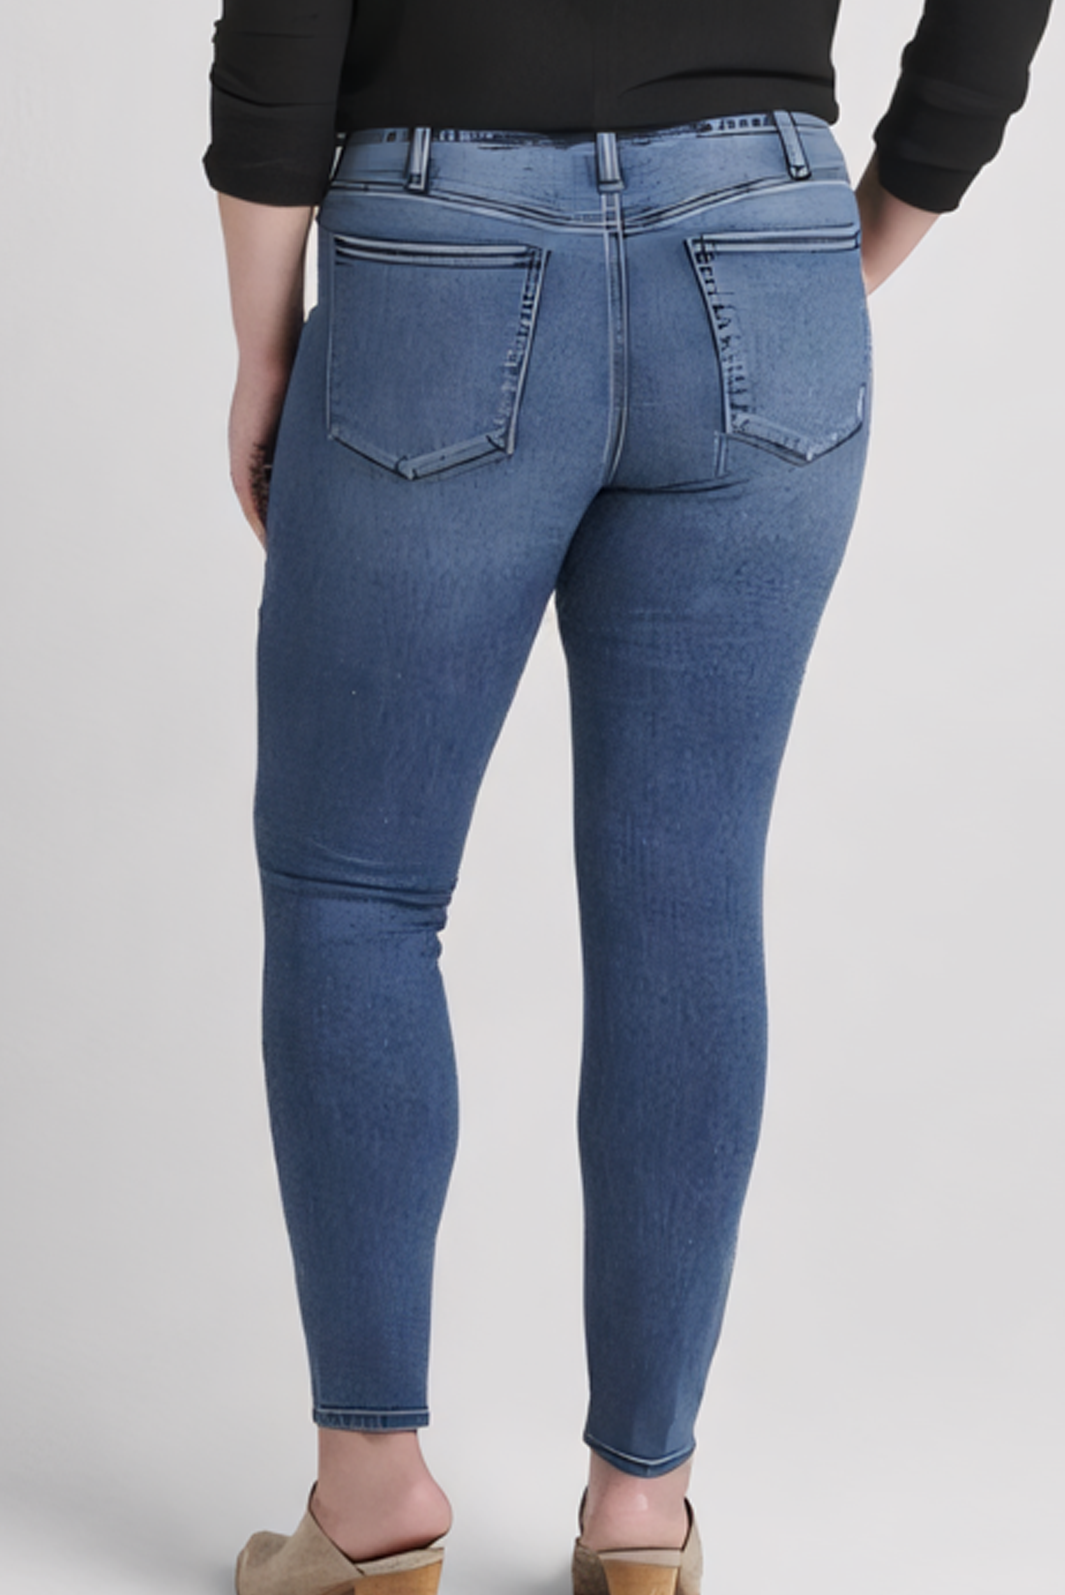 Silver Jeans Plus Size Most Wanted Skinny Jeans